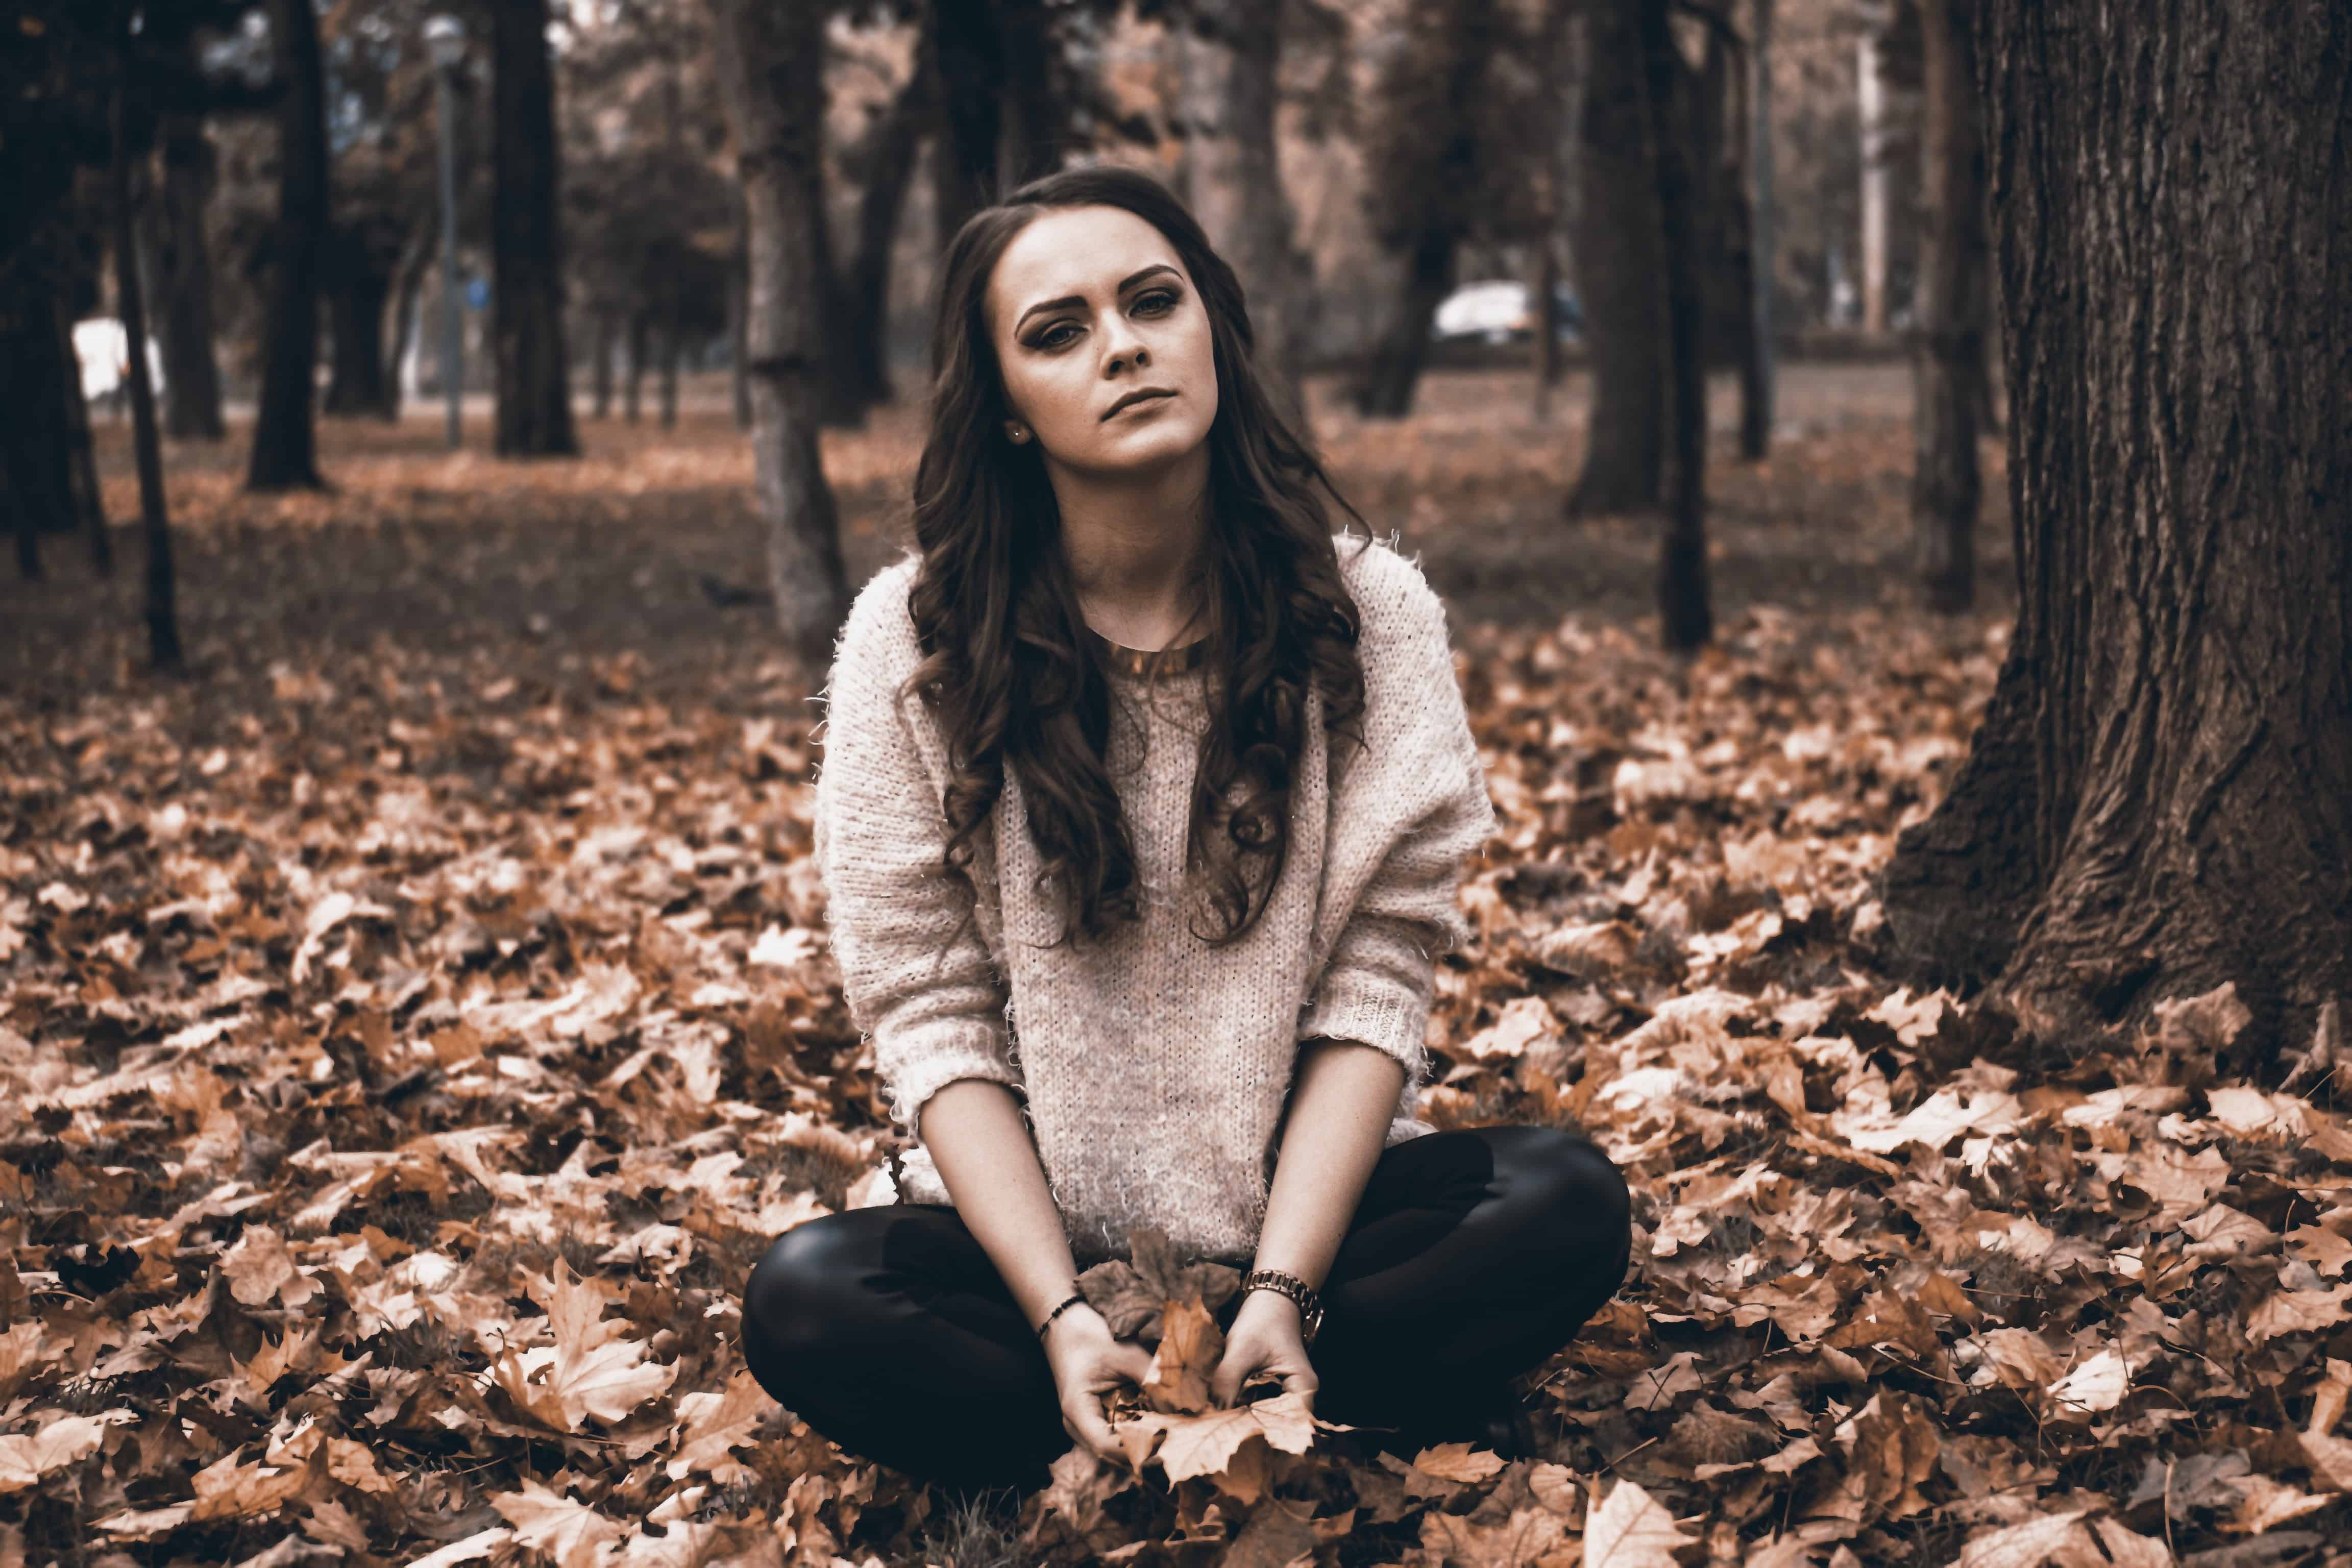 A woman sitting on the ground in leaves.